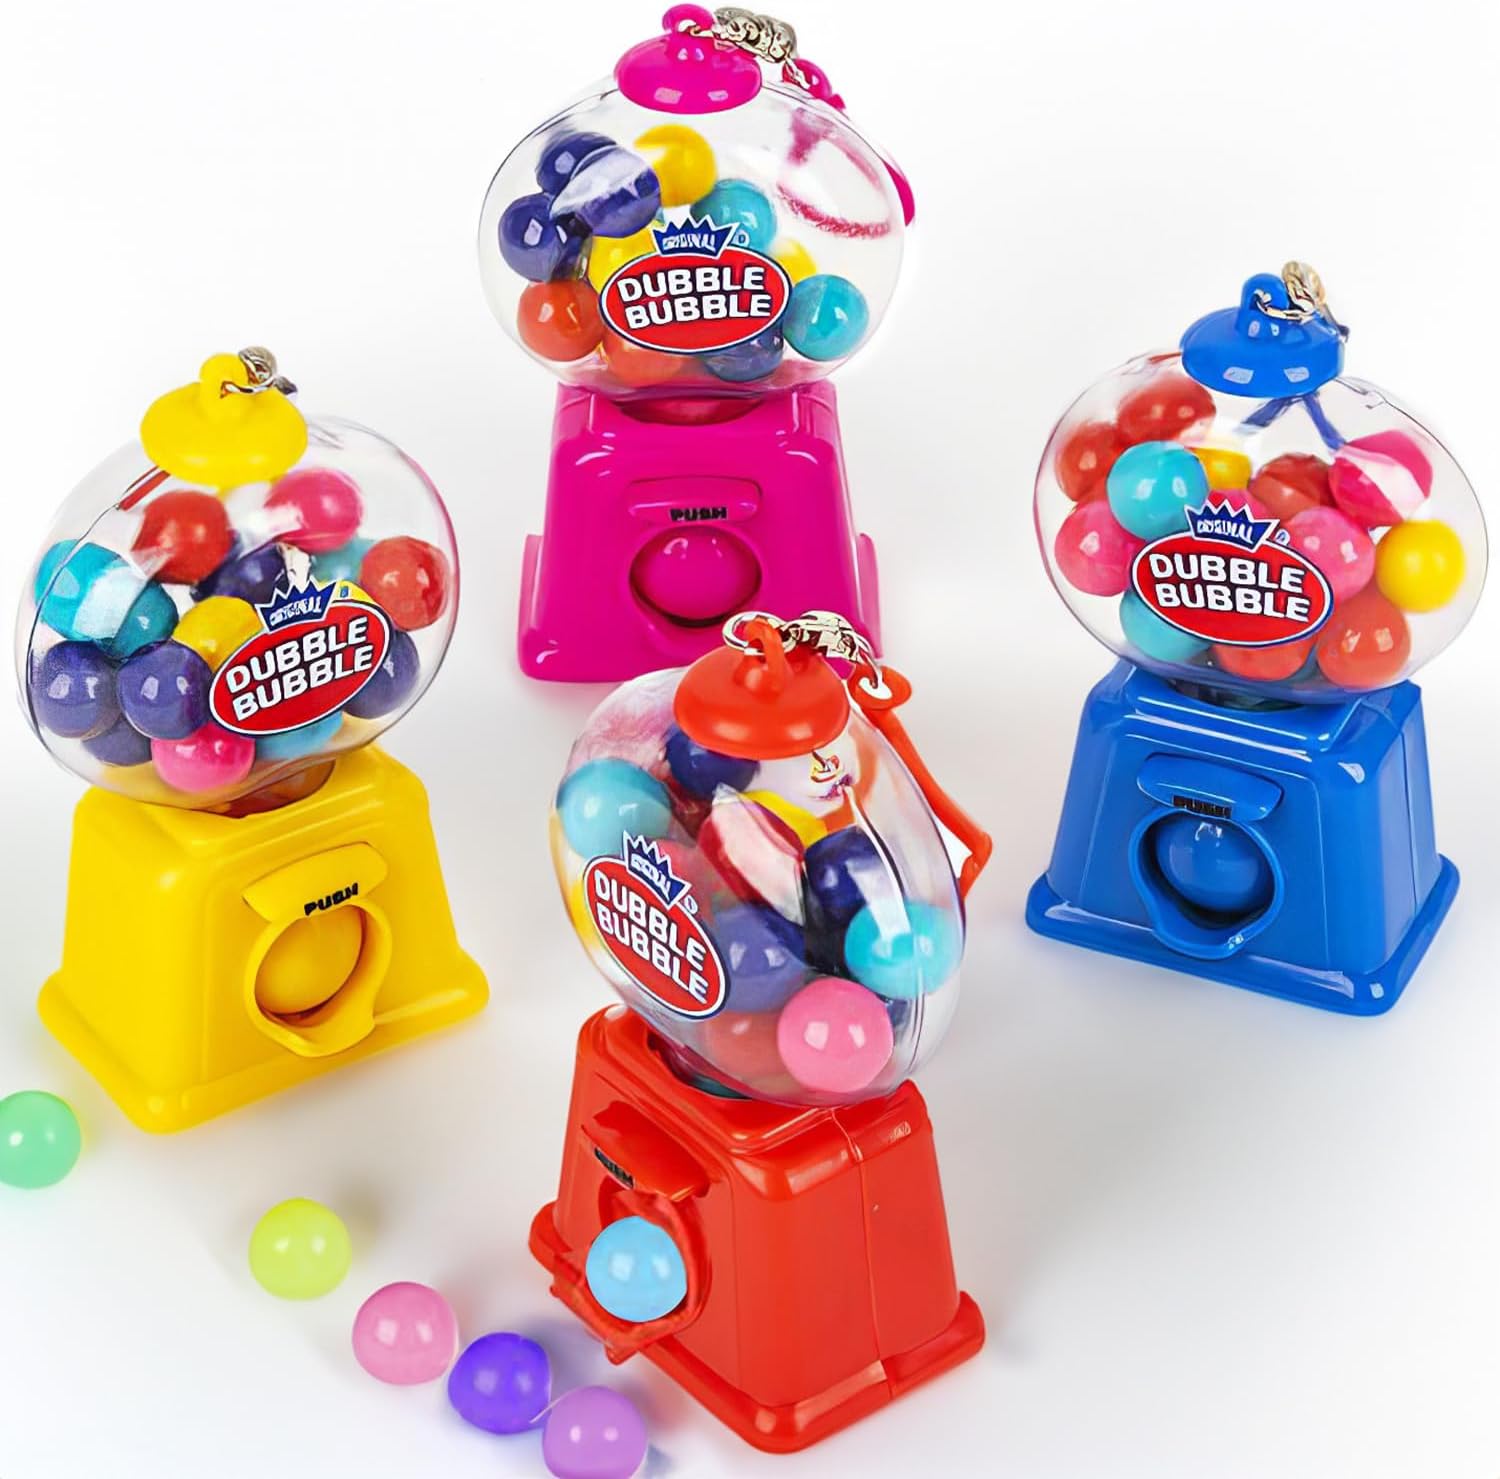 Bubble Gum Machine Keychains for Kids - Set of 4 Mini Gumball Machines - Colorful Candy Dispenser Key Chains with Mini Gumballs Inside